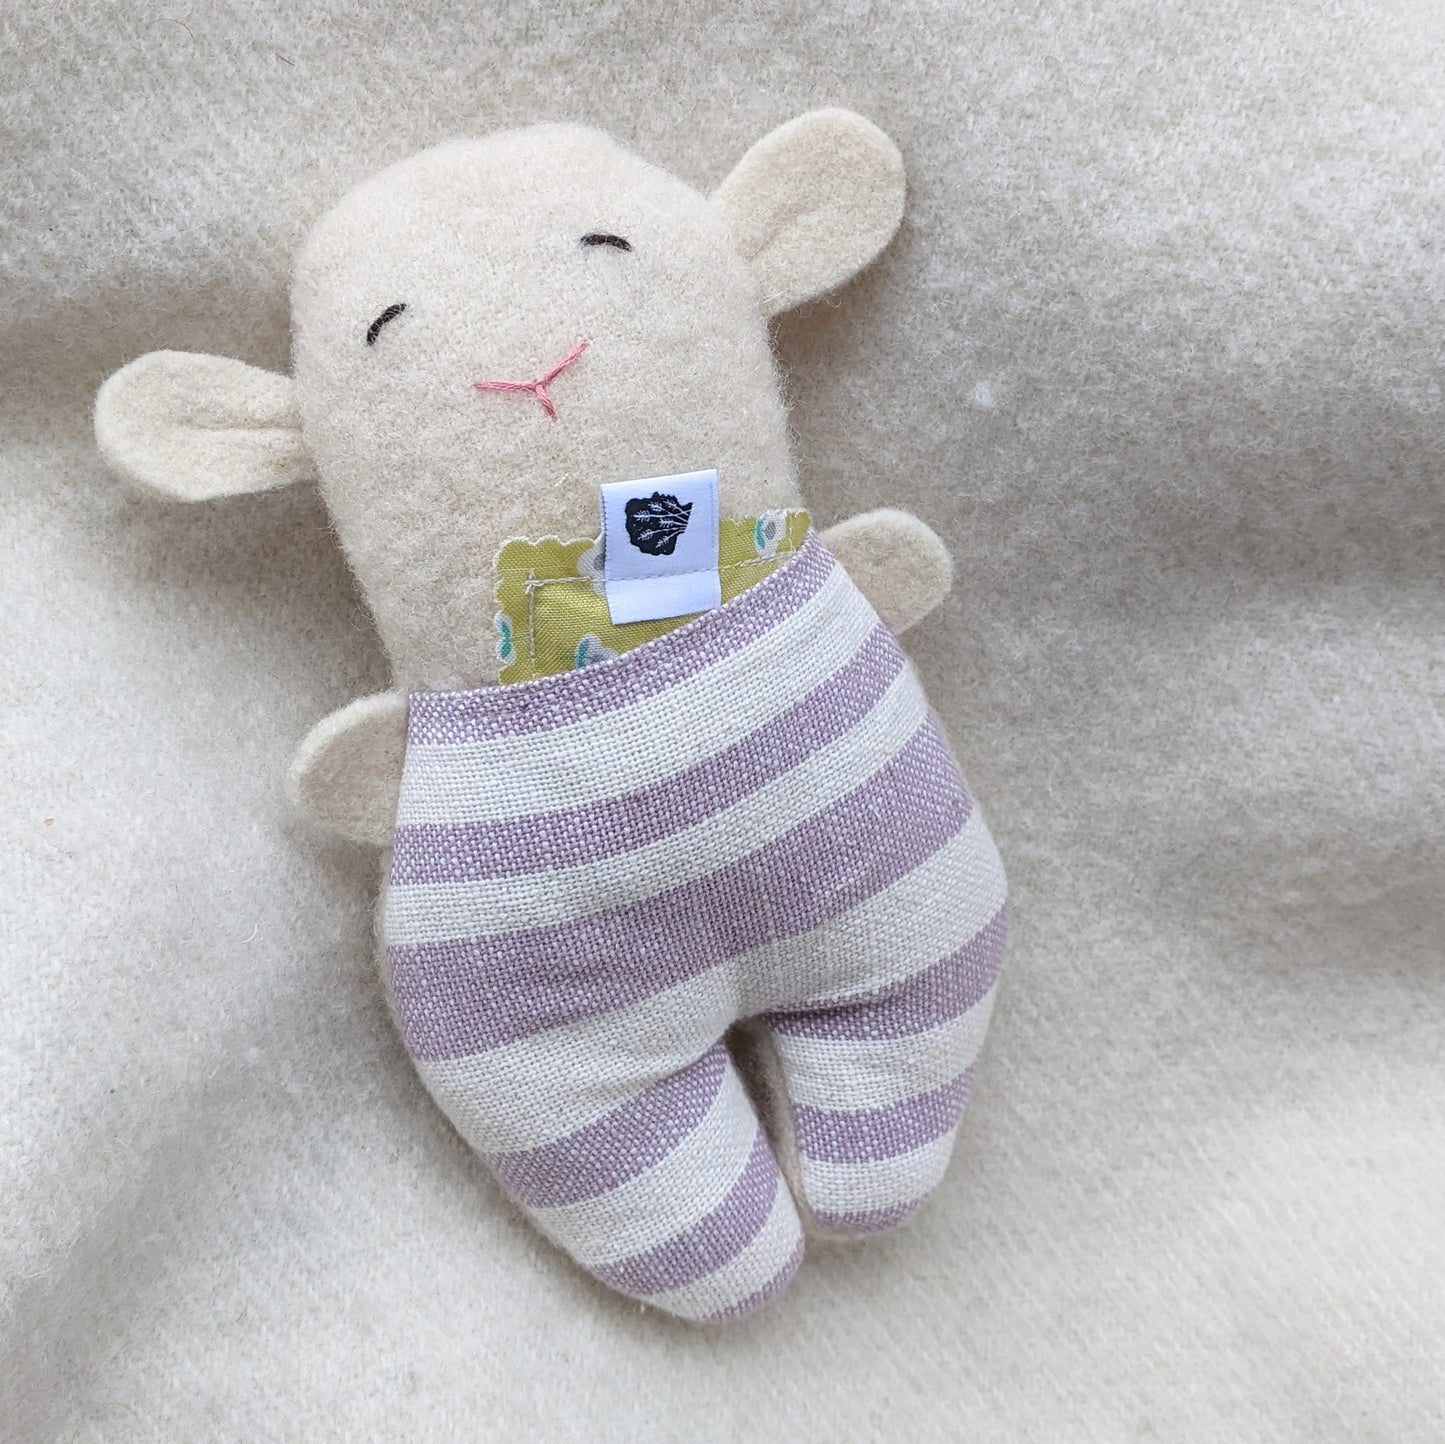 Small wool lavender lamb with striped purple pants